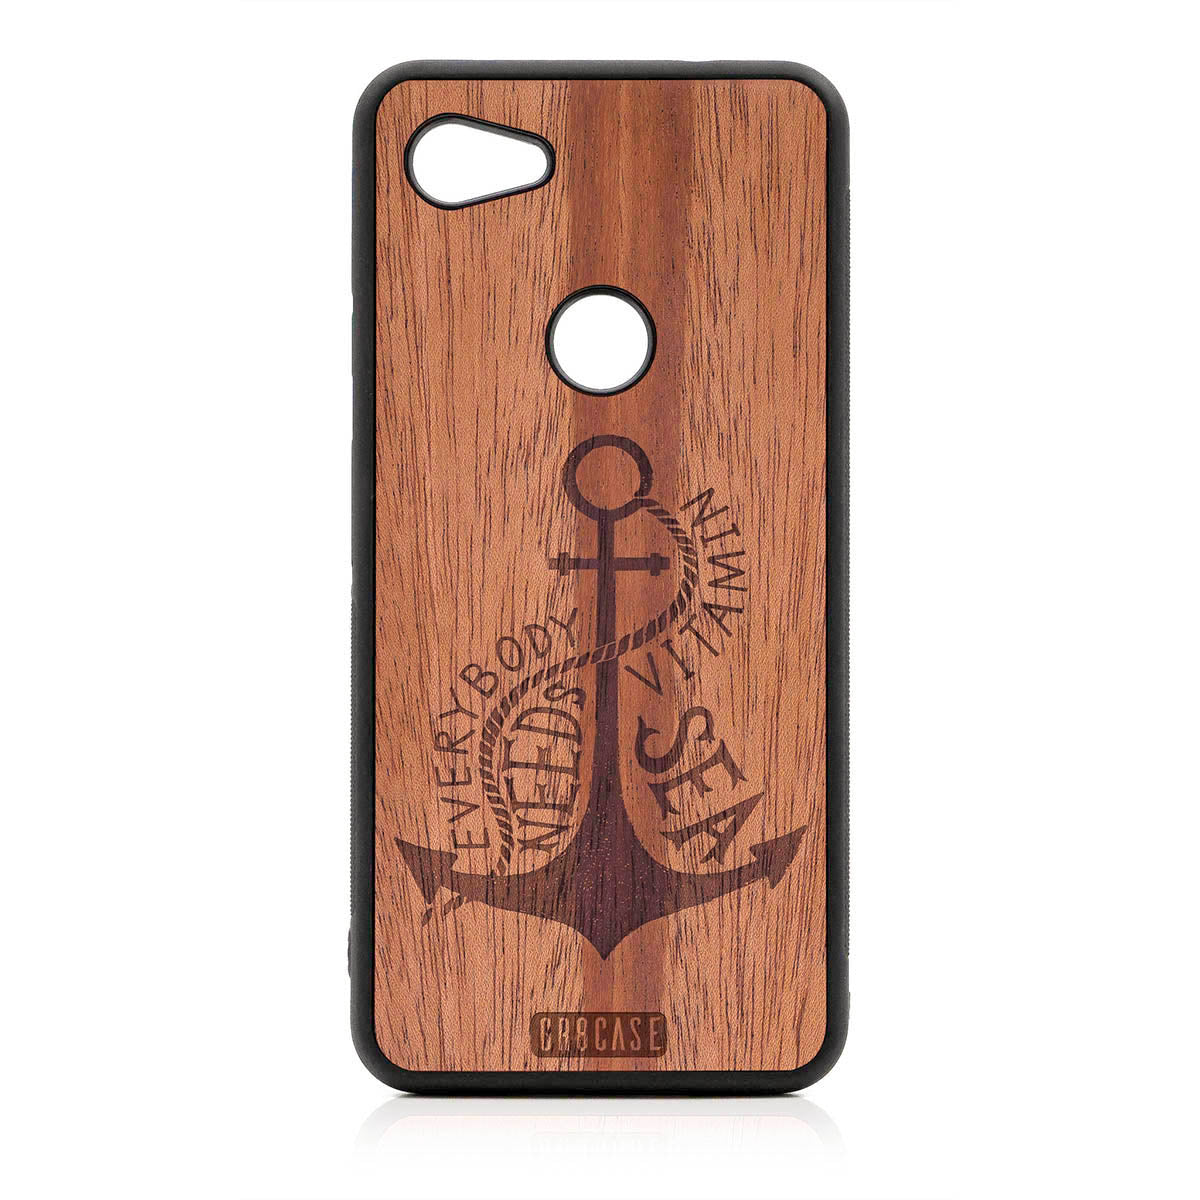 Everybody Needs Vitamin Sea (Anchor) Design Wood Case For Google Pixel 3A by GR8CASE